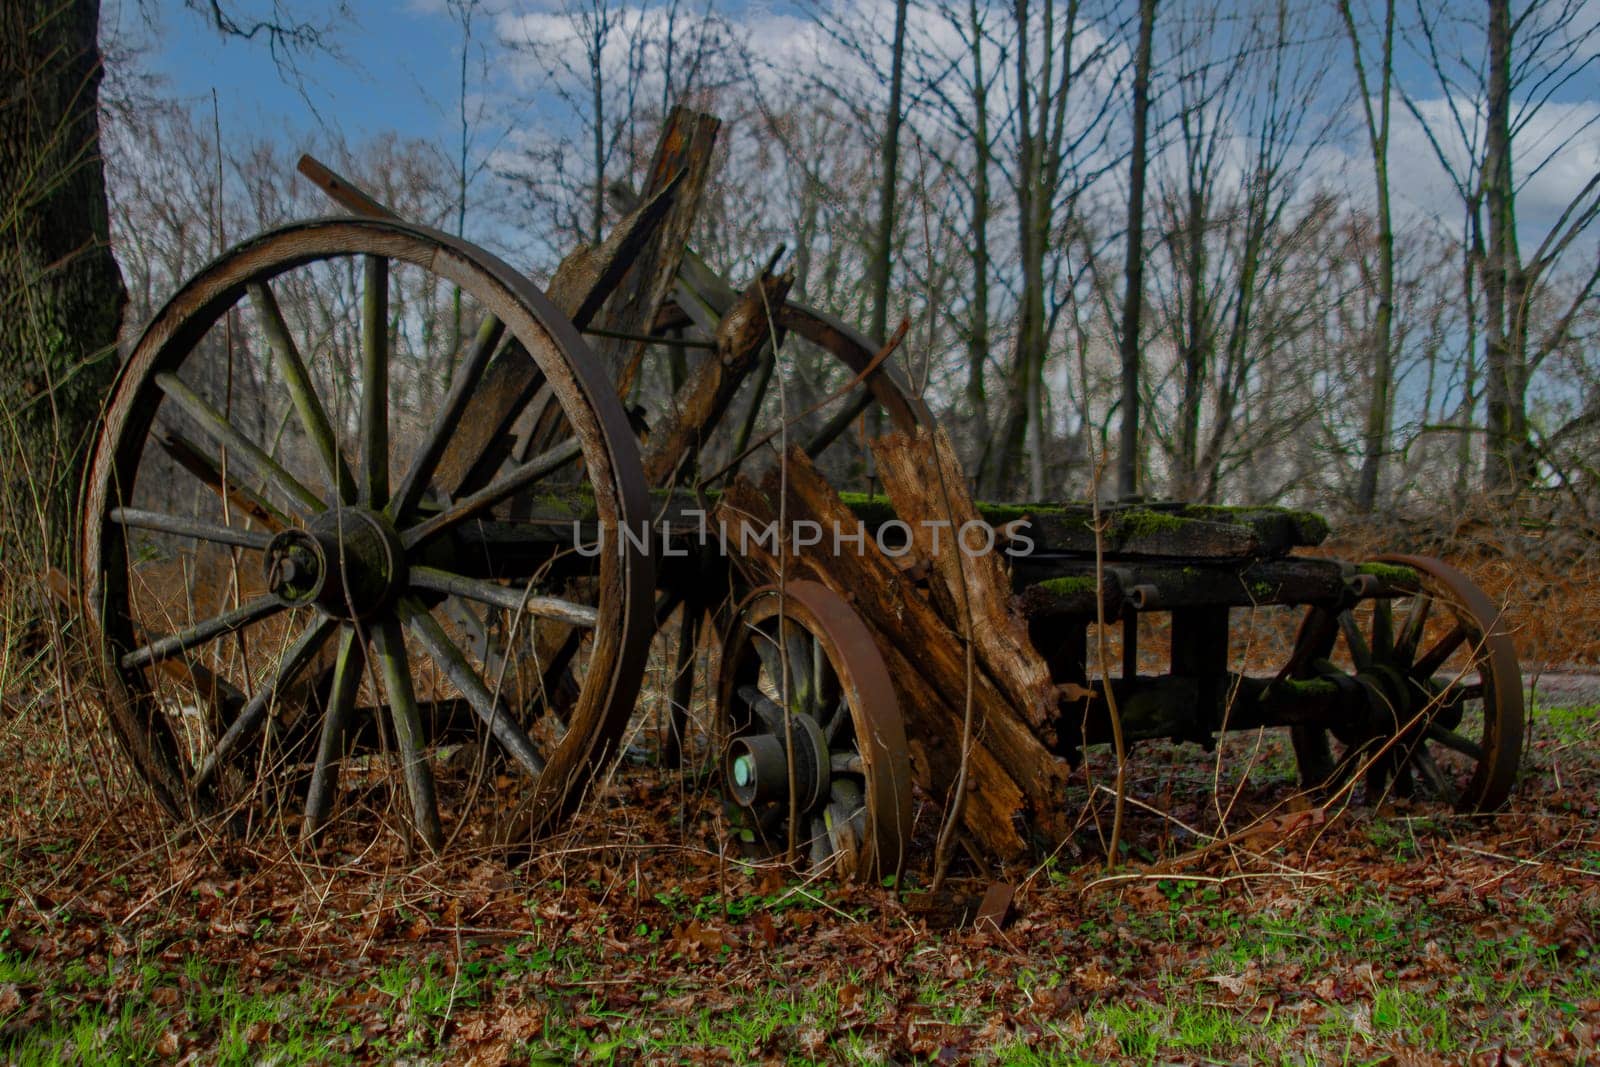 An old wooden wagon wheel is sitting in the grass. High quality